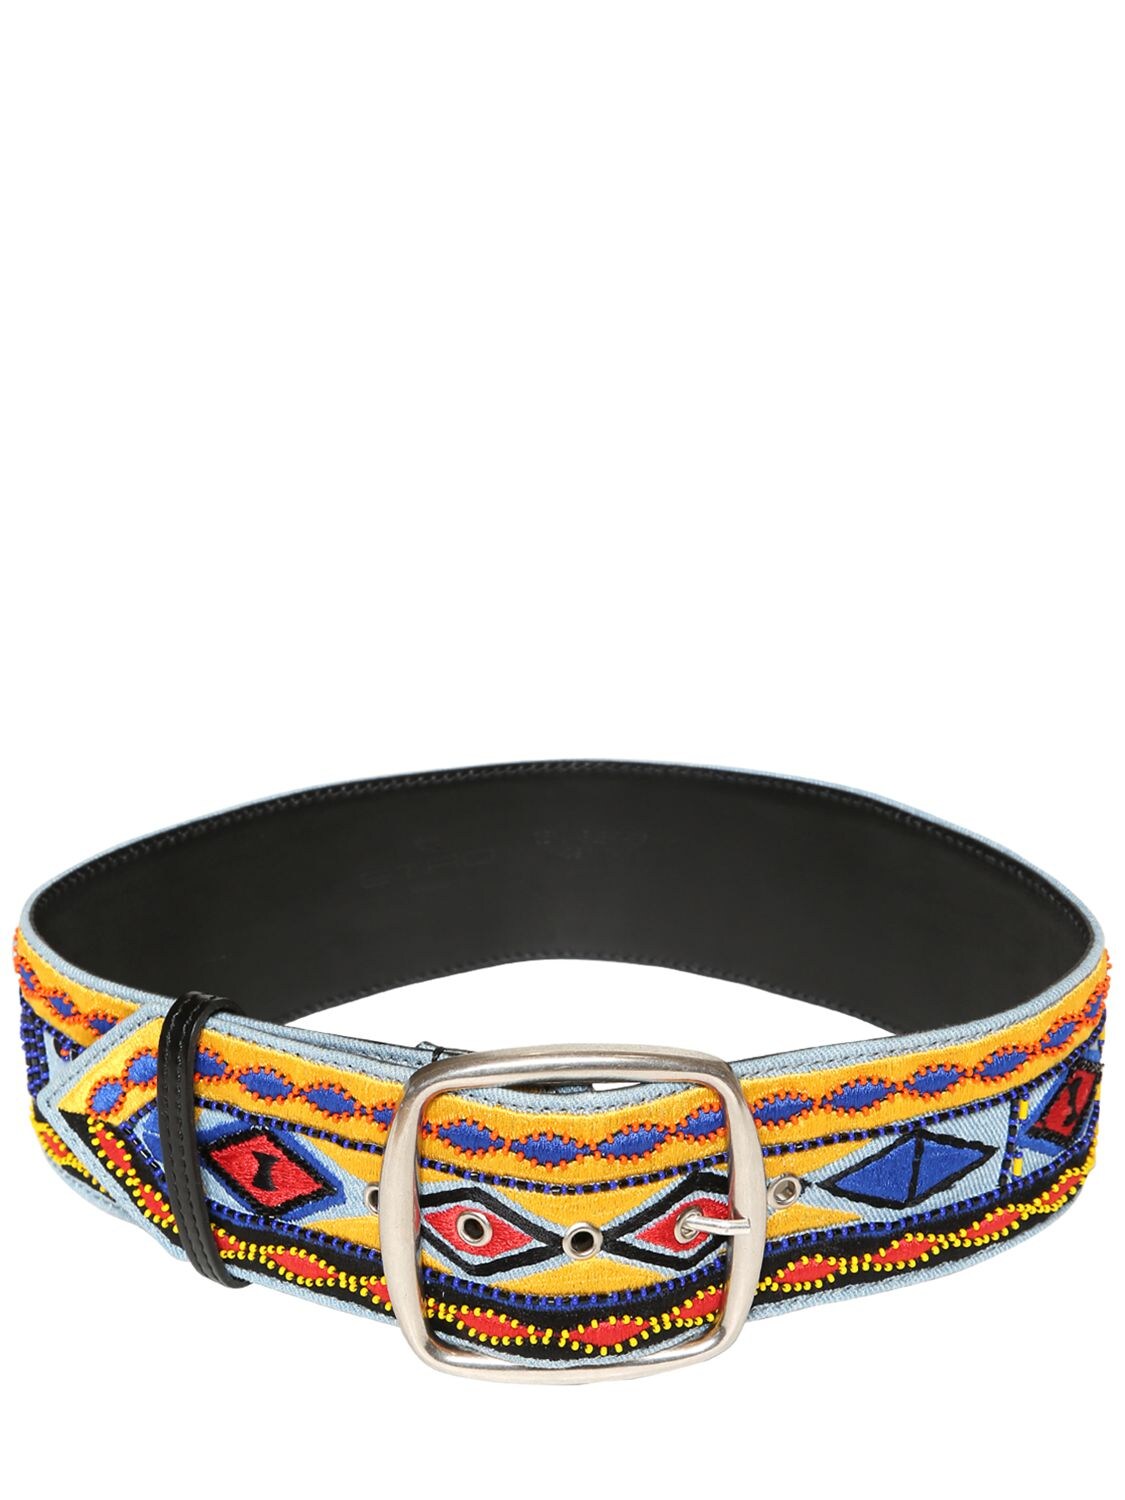 Etro Embroidered Leather Belt In Blue,yellow